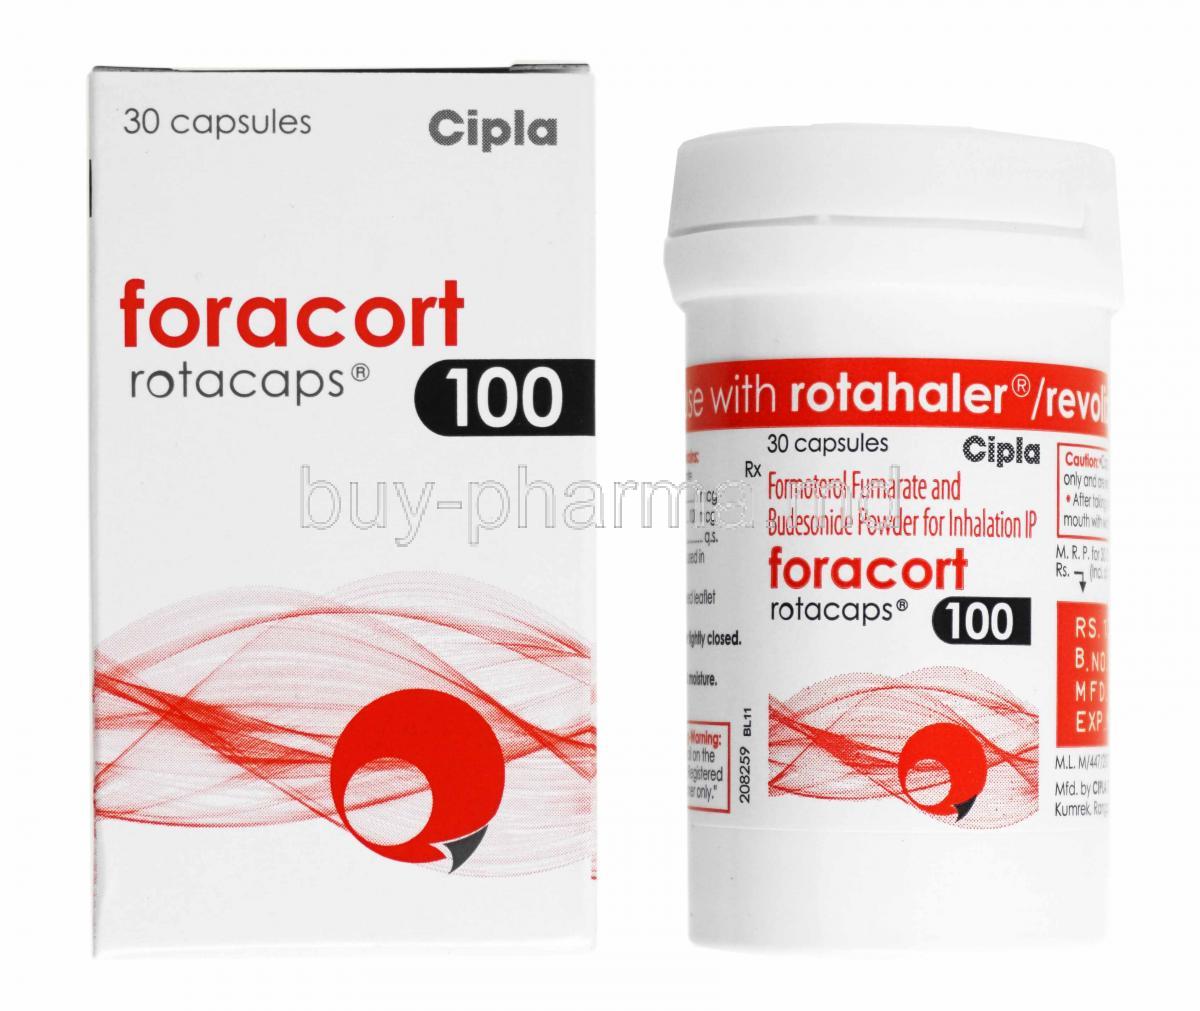 Foracort Rotacap, Formoterol Fumarate 6mcg and Budesonide 100mcg box and bottle